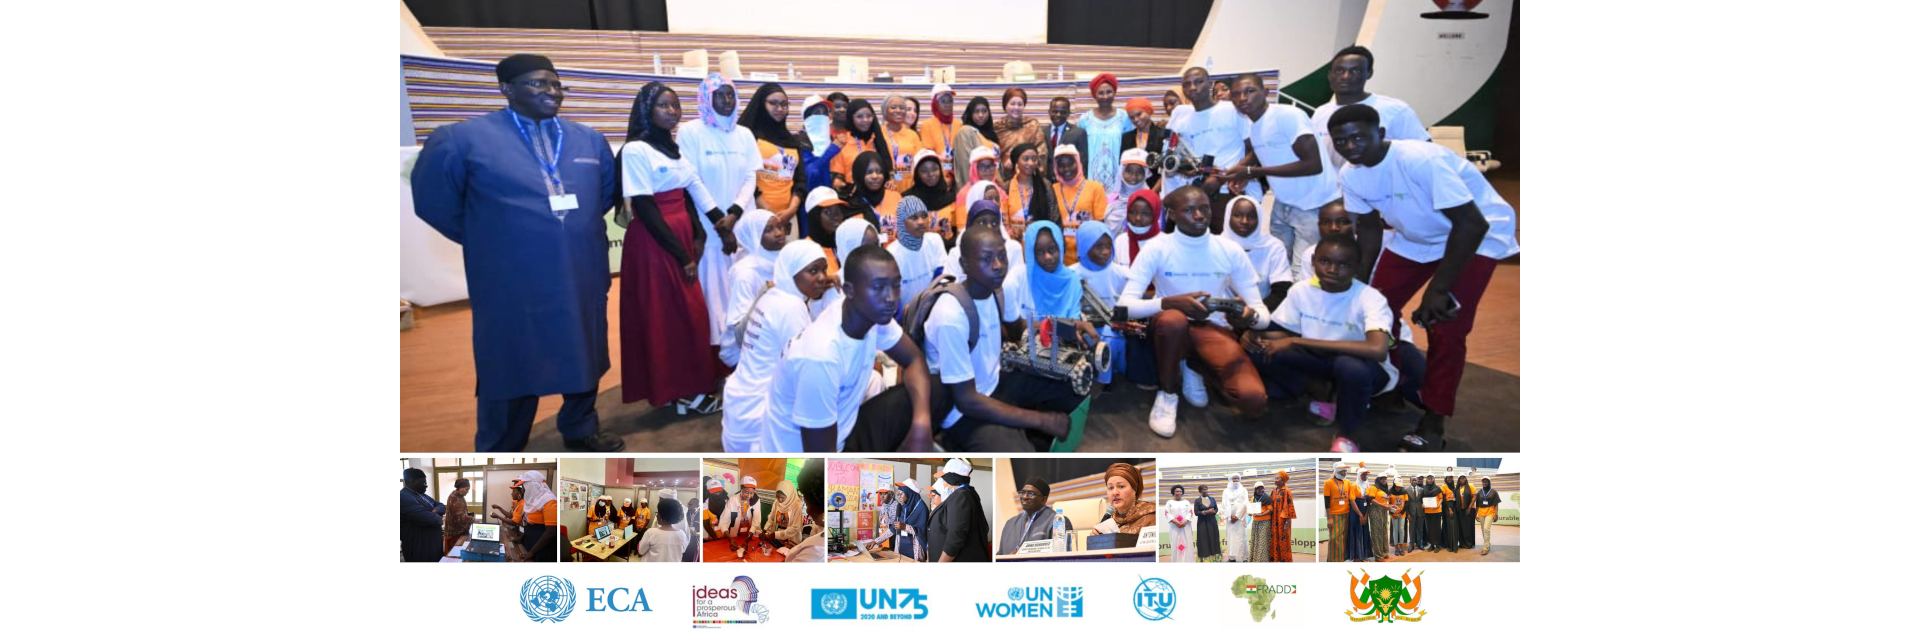 Successful conclusion of the 7th edition of the Connected African Girls Coding Camp in Niamey, Niger